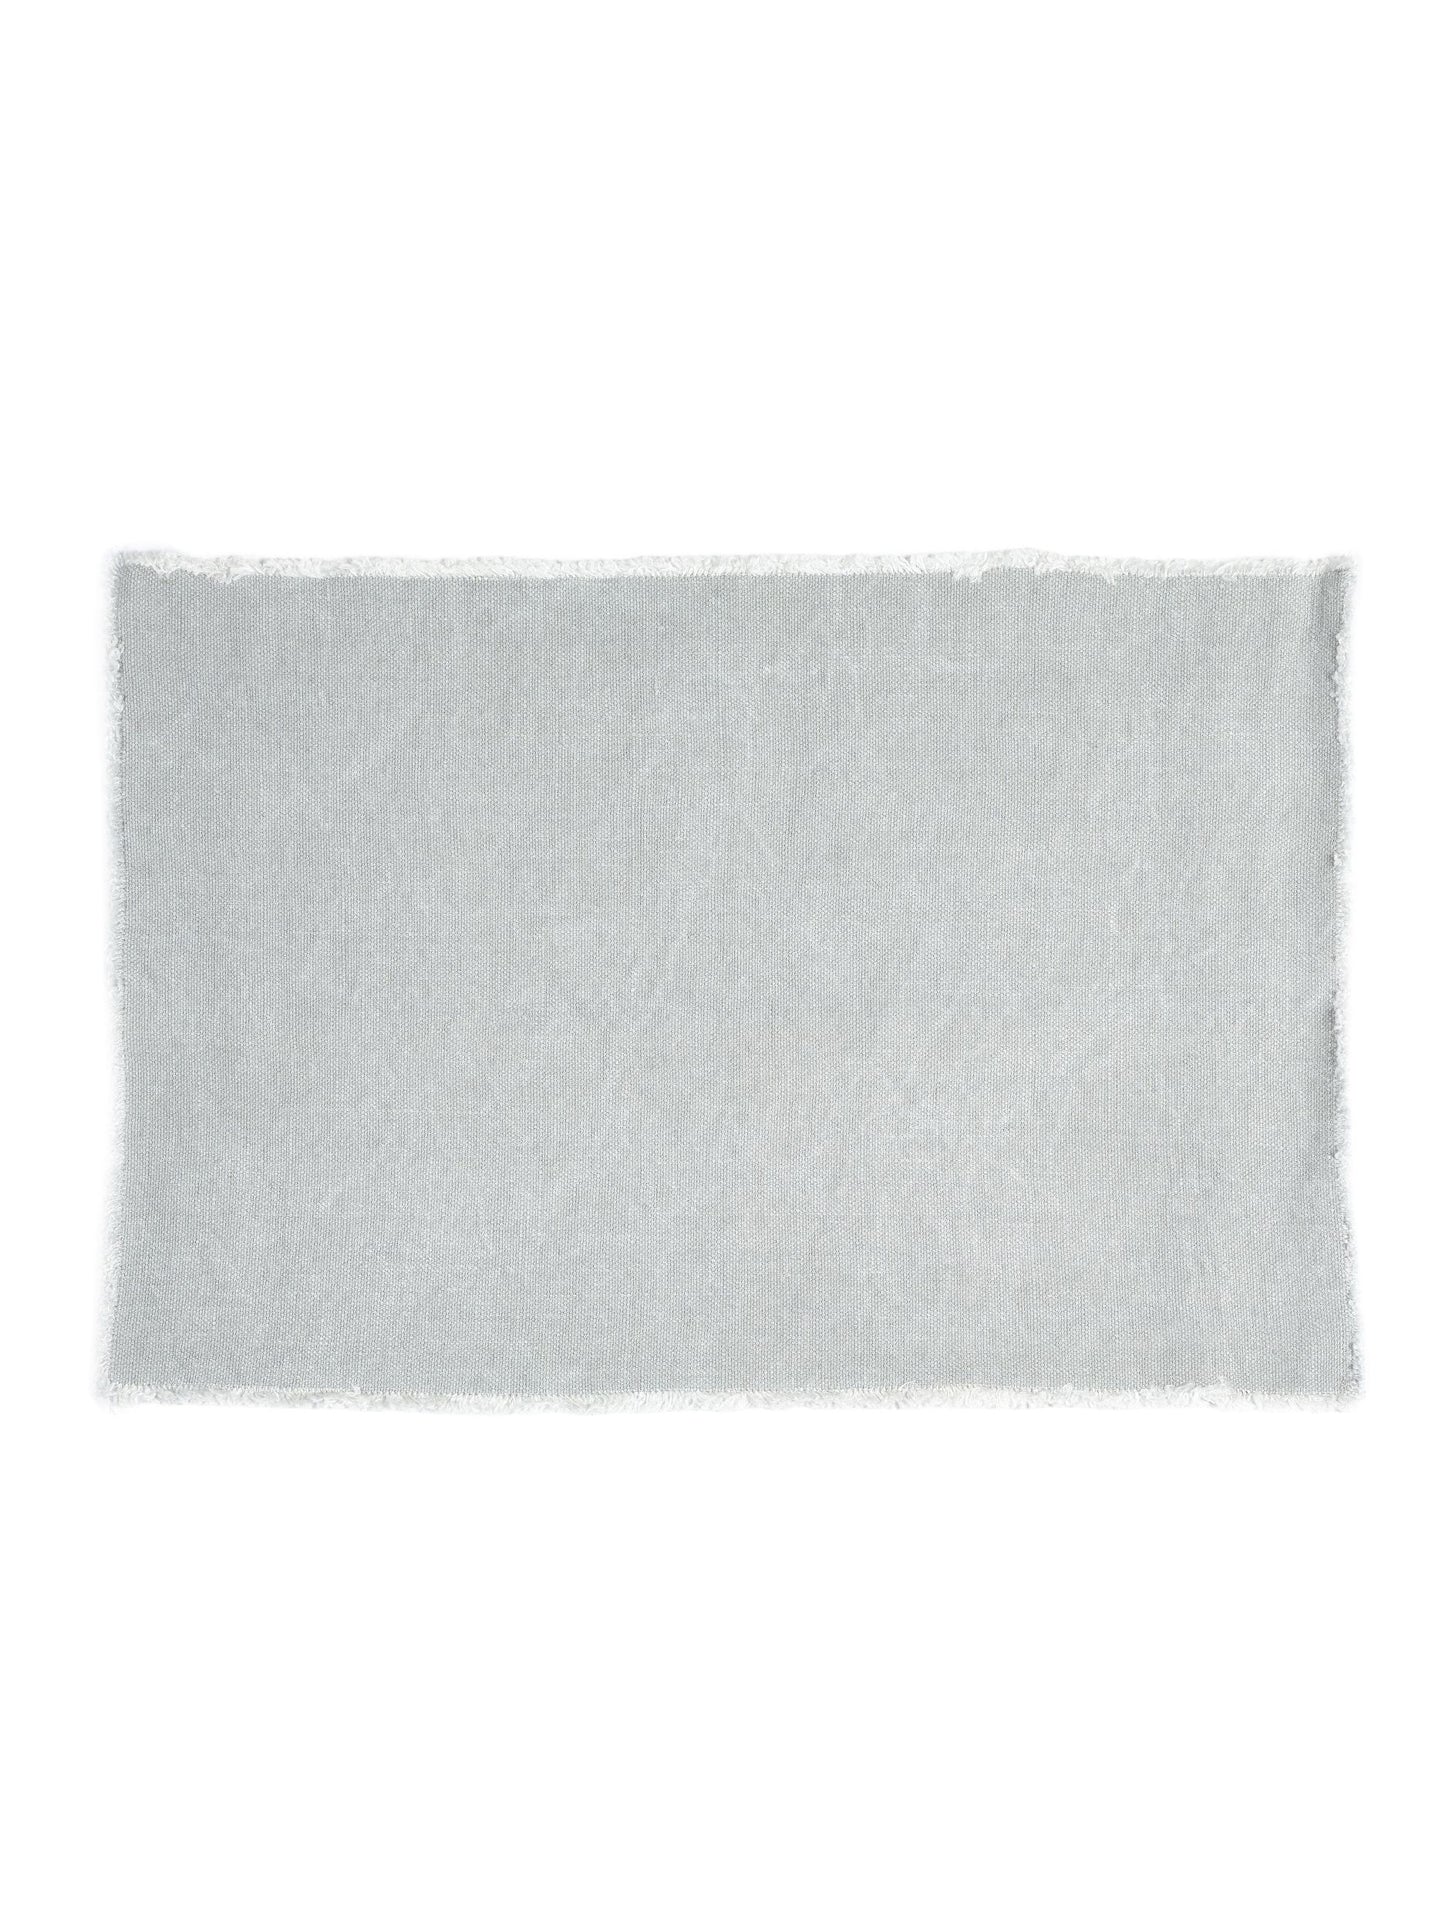 Libeco Pacific Linen Placemats